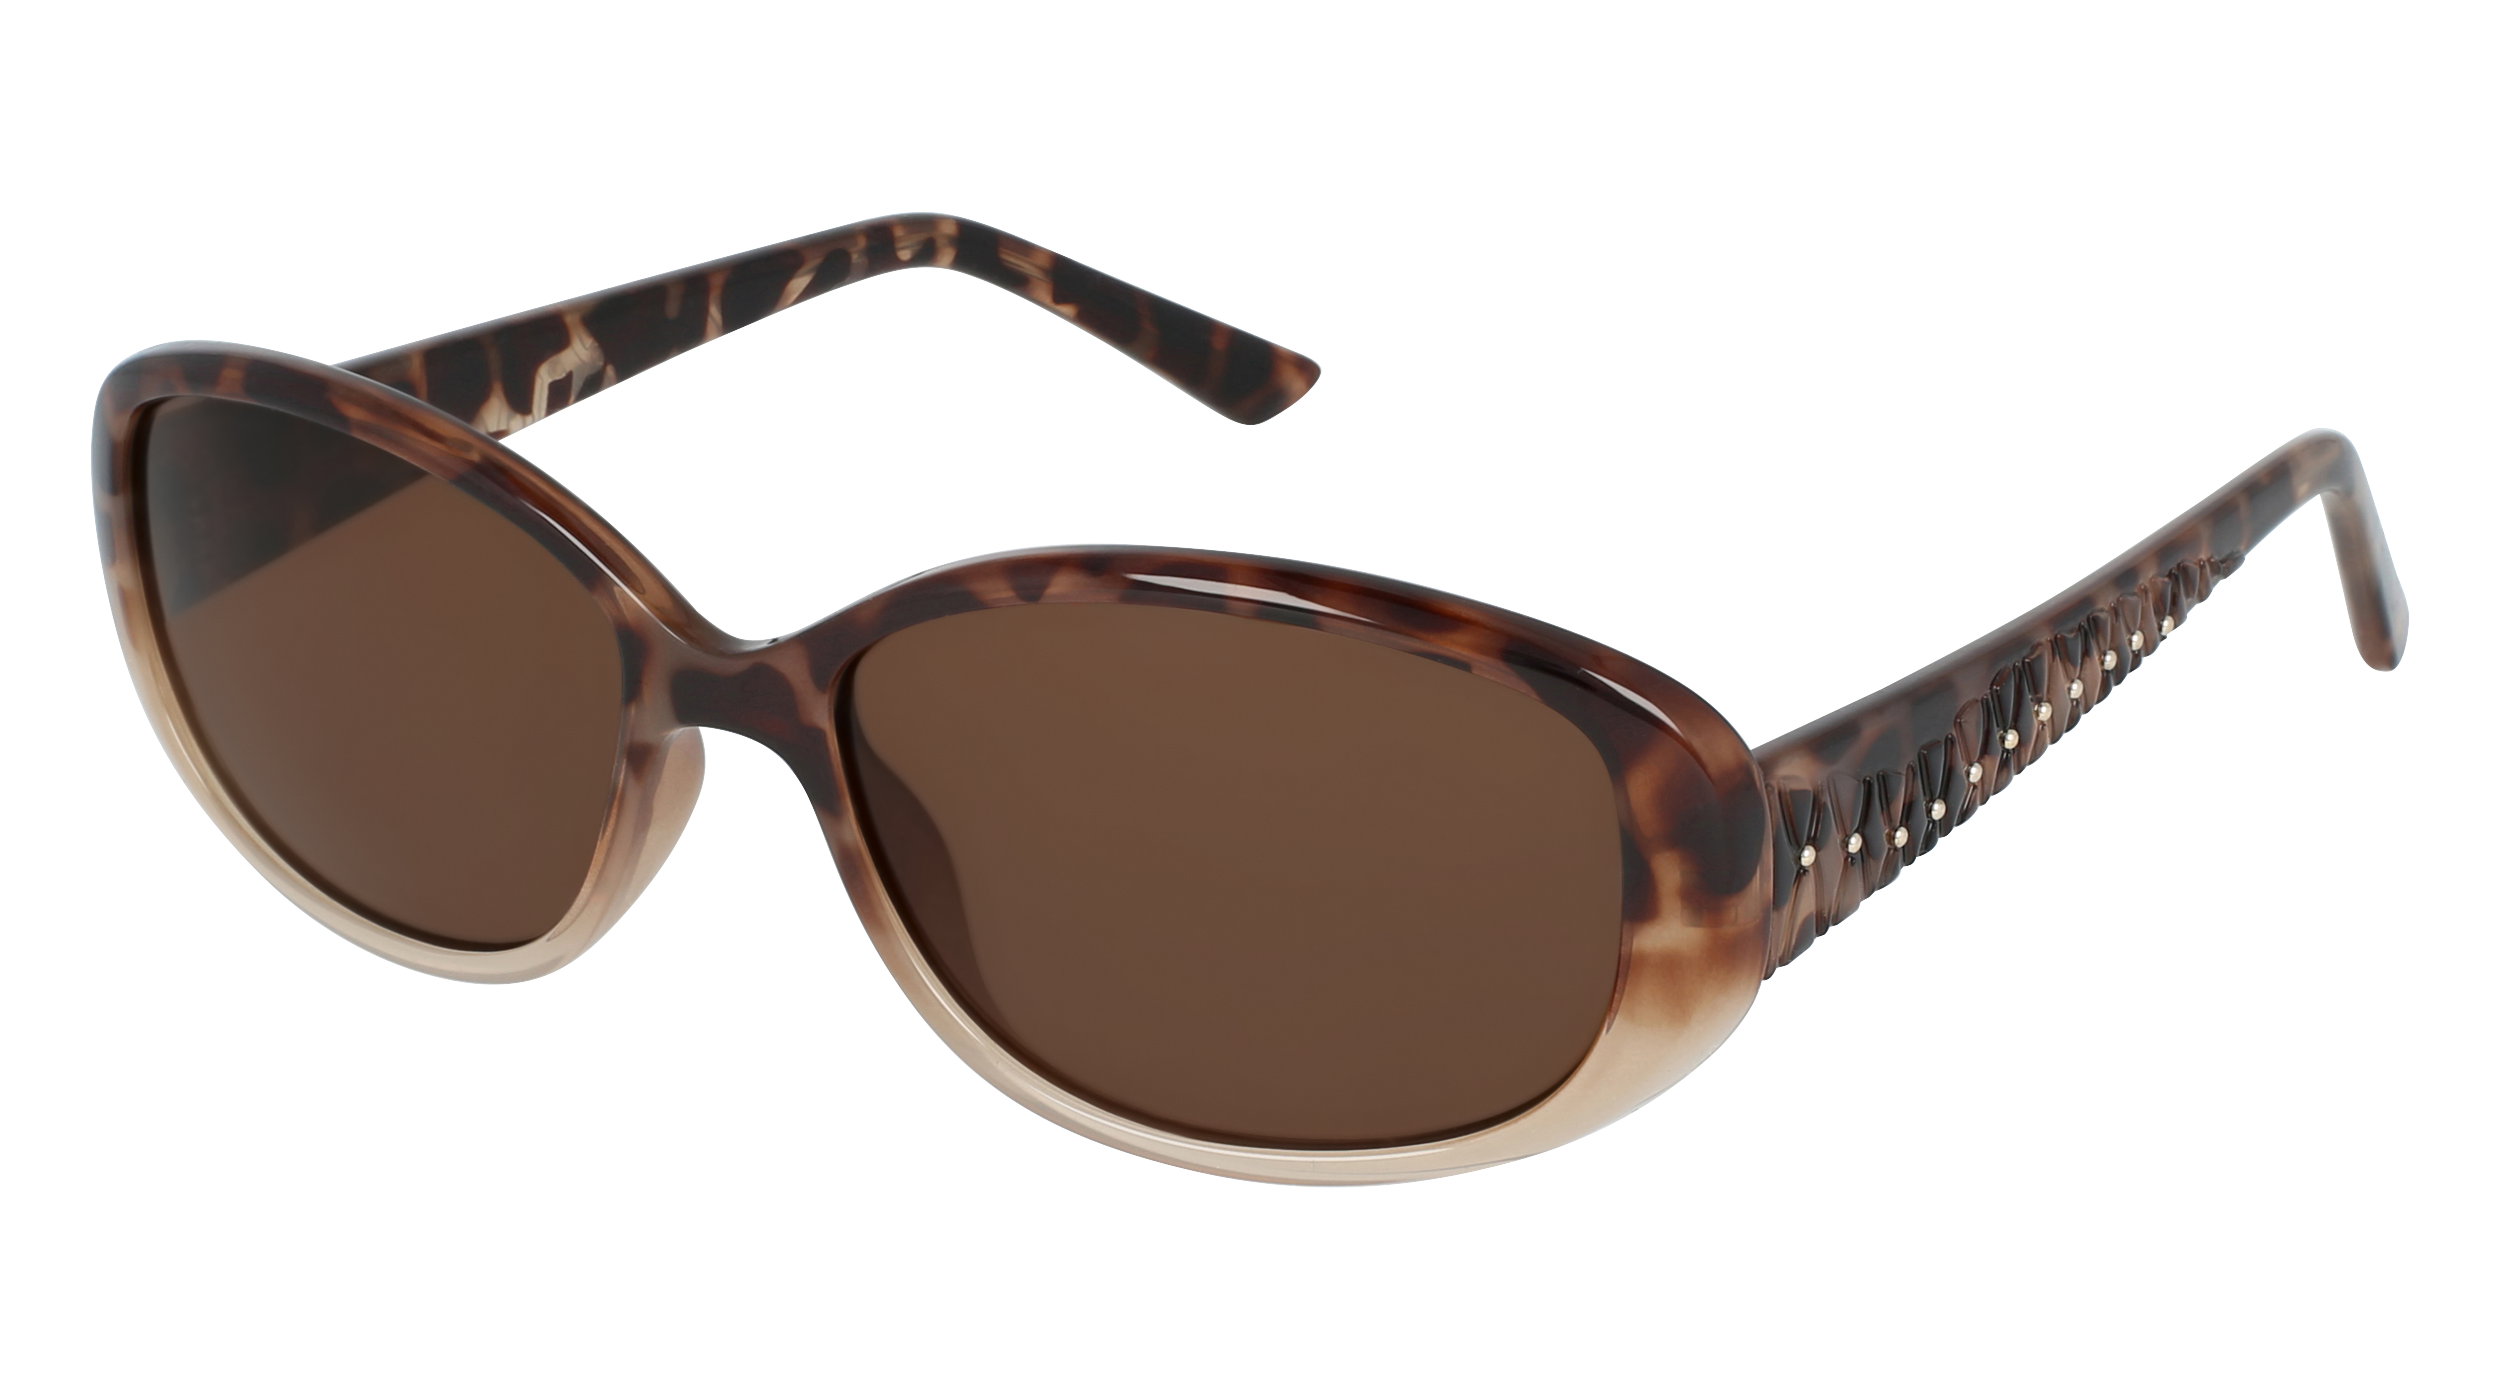 N S 714 women's sunglasses (from the side)